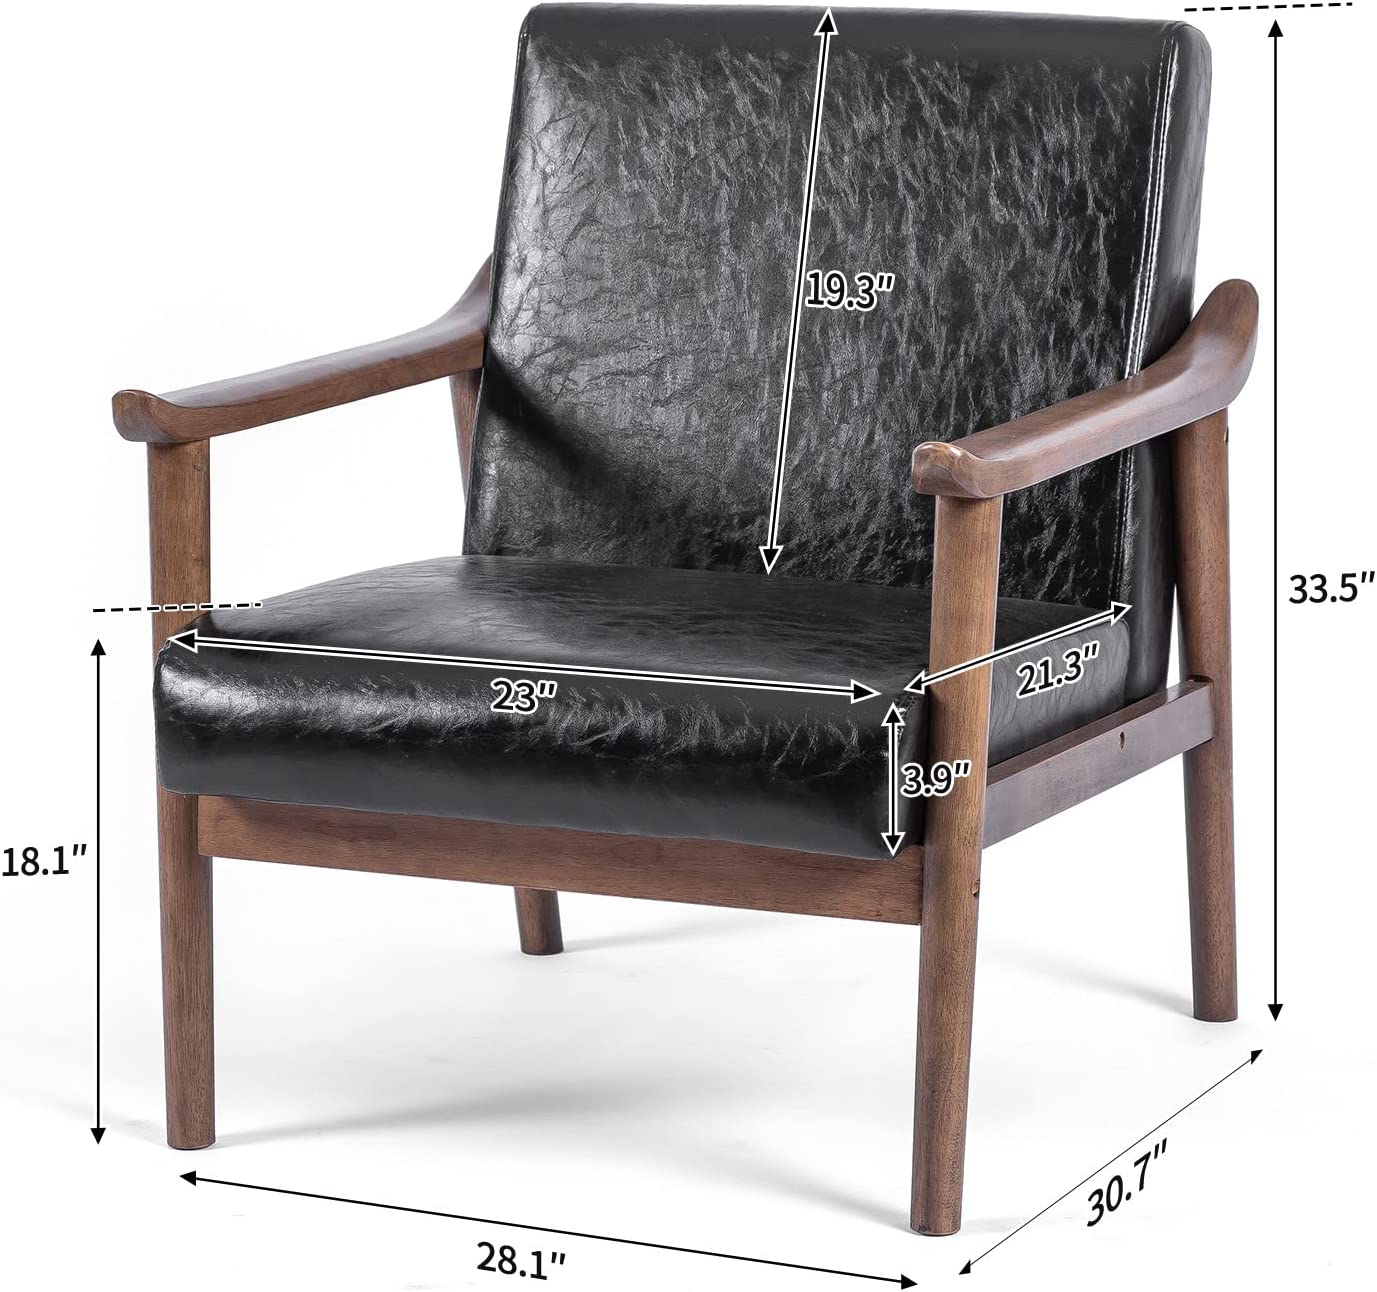 UNICOO - PU Leather Accent Chair Armchair with Solid Wood Frame. Mid Century Modern Reading Arm Chair Sofa Chairs for Living Room Bedroom (U2120)